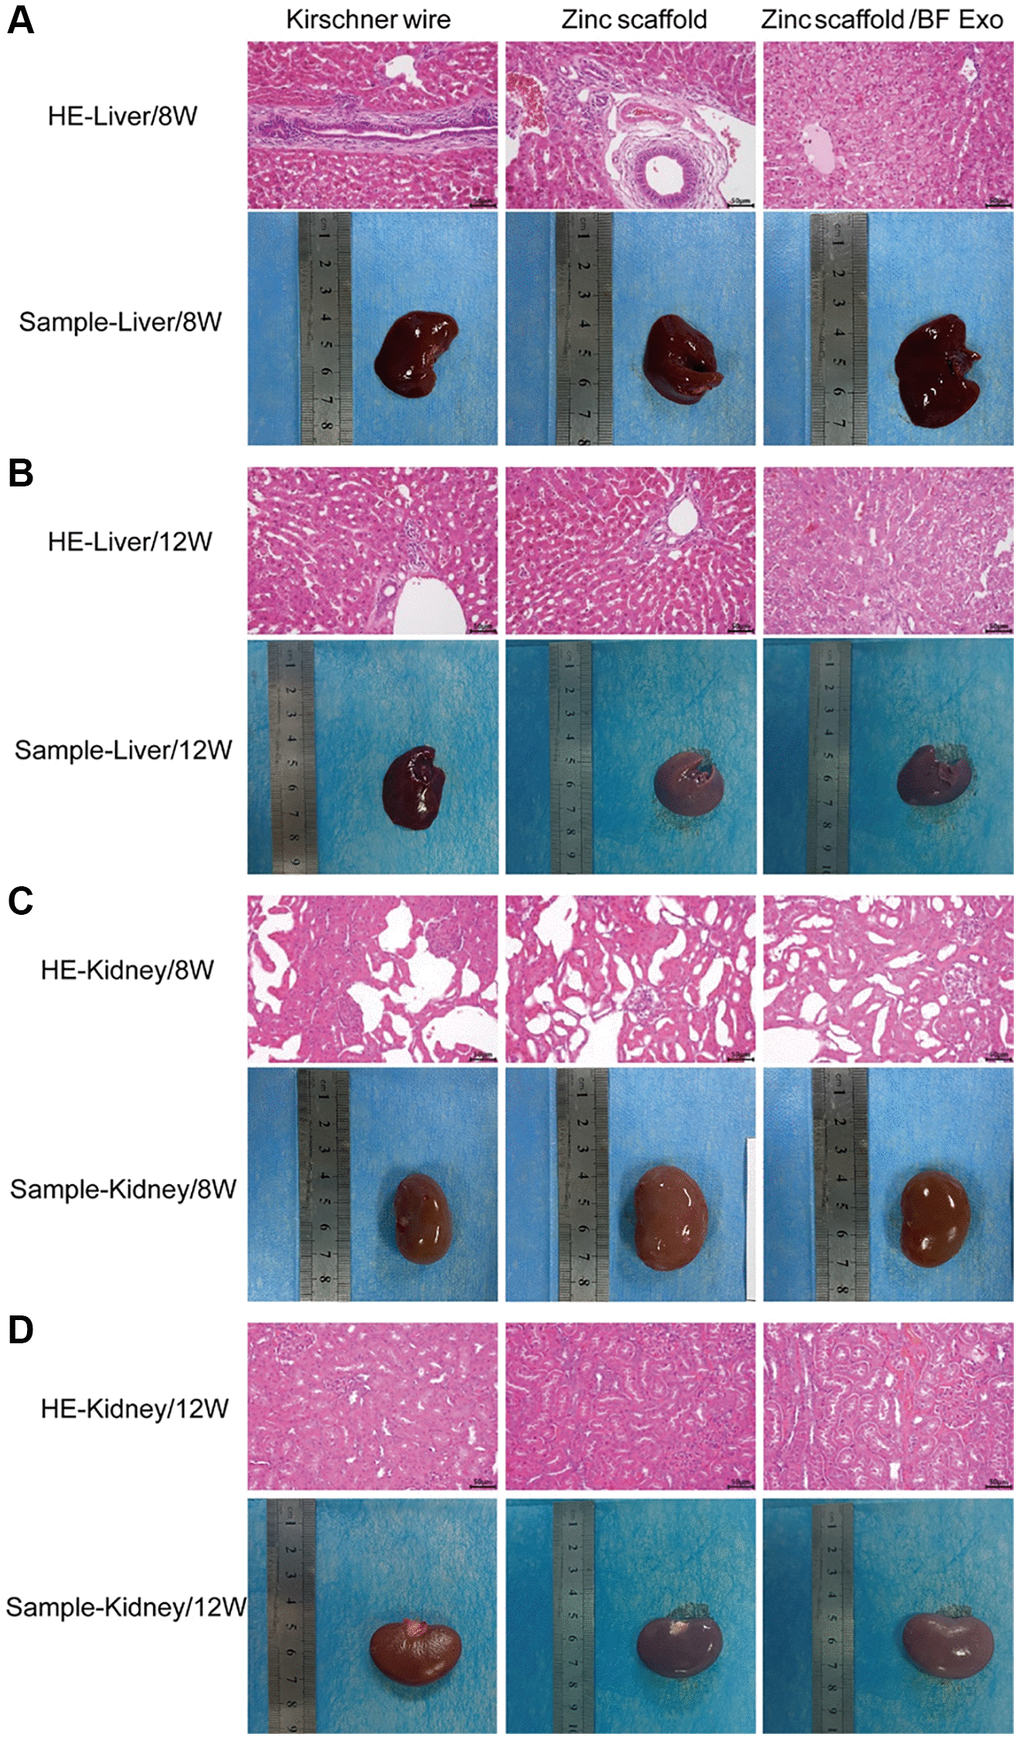 Assessment of in vivo hepatorenal toxicity of zinc scaffold/BF Exo composite implant. (A) HE staining results and physical samples of rabbit liver tissue after 8 weeks of modeling by each group; (B) HE staining results and physical samples of rabbit liver tissue after 12 weeks of modeling by each group; (C) HE staining results and physical samples of rabbit kidney tissue after 8 weeks of modeling by each group; (D) HE staining results and physical samples of rabbit kidney tissue after 12 weeks of modeling by each group (200×, n=3).